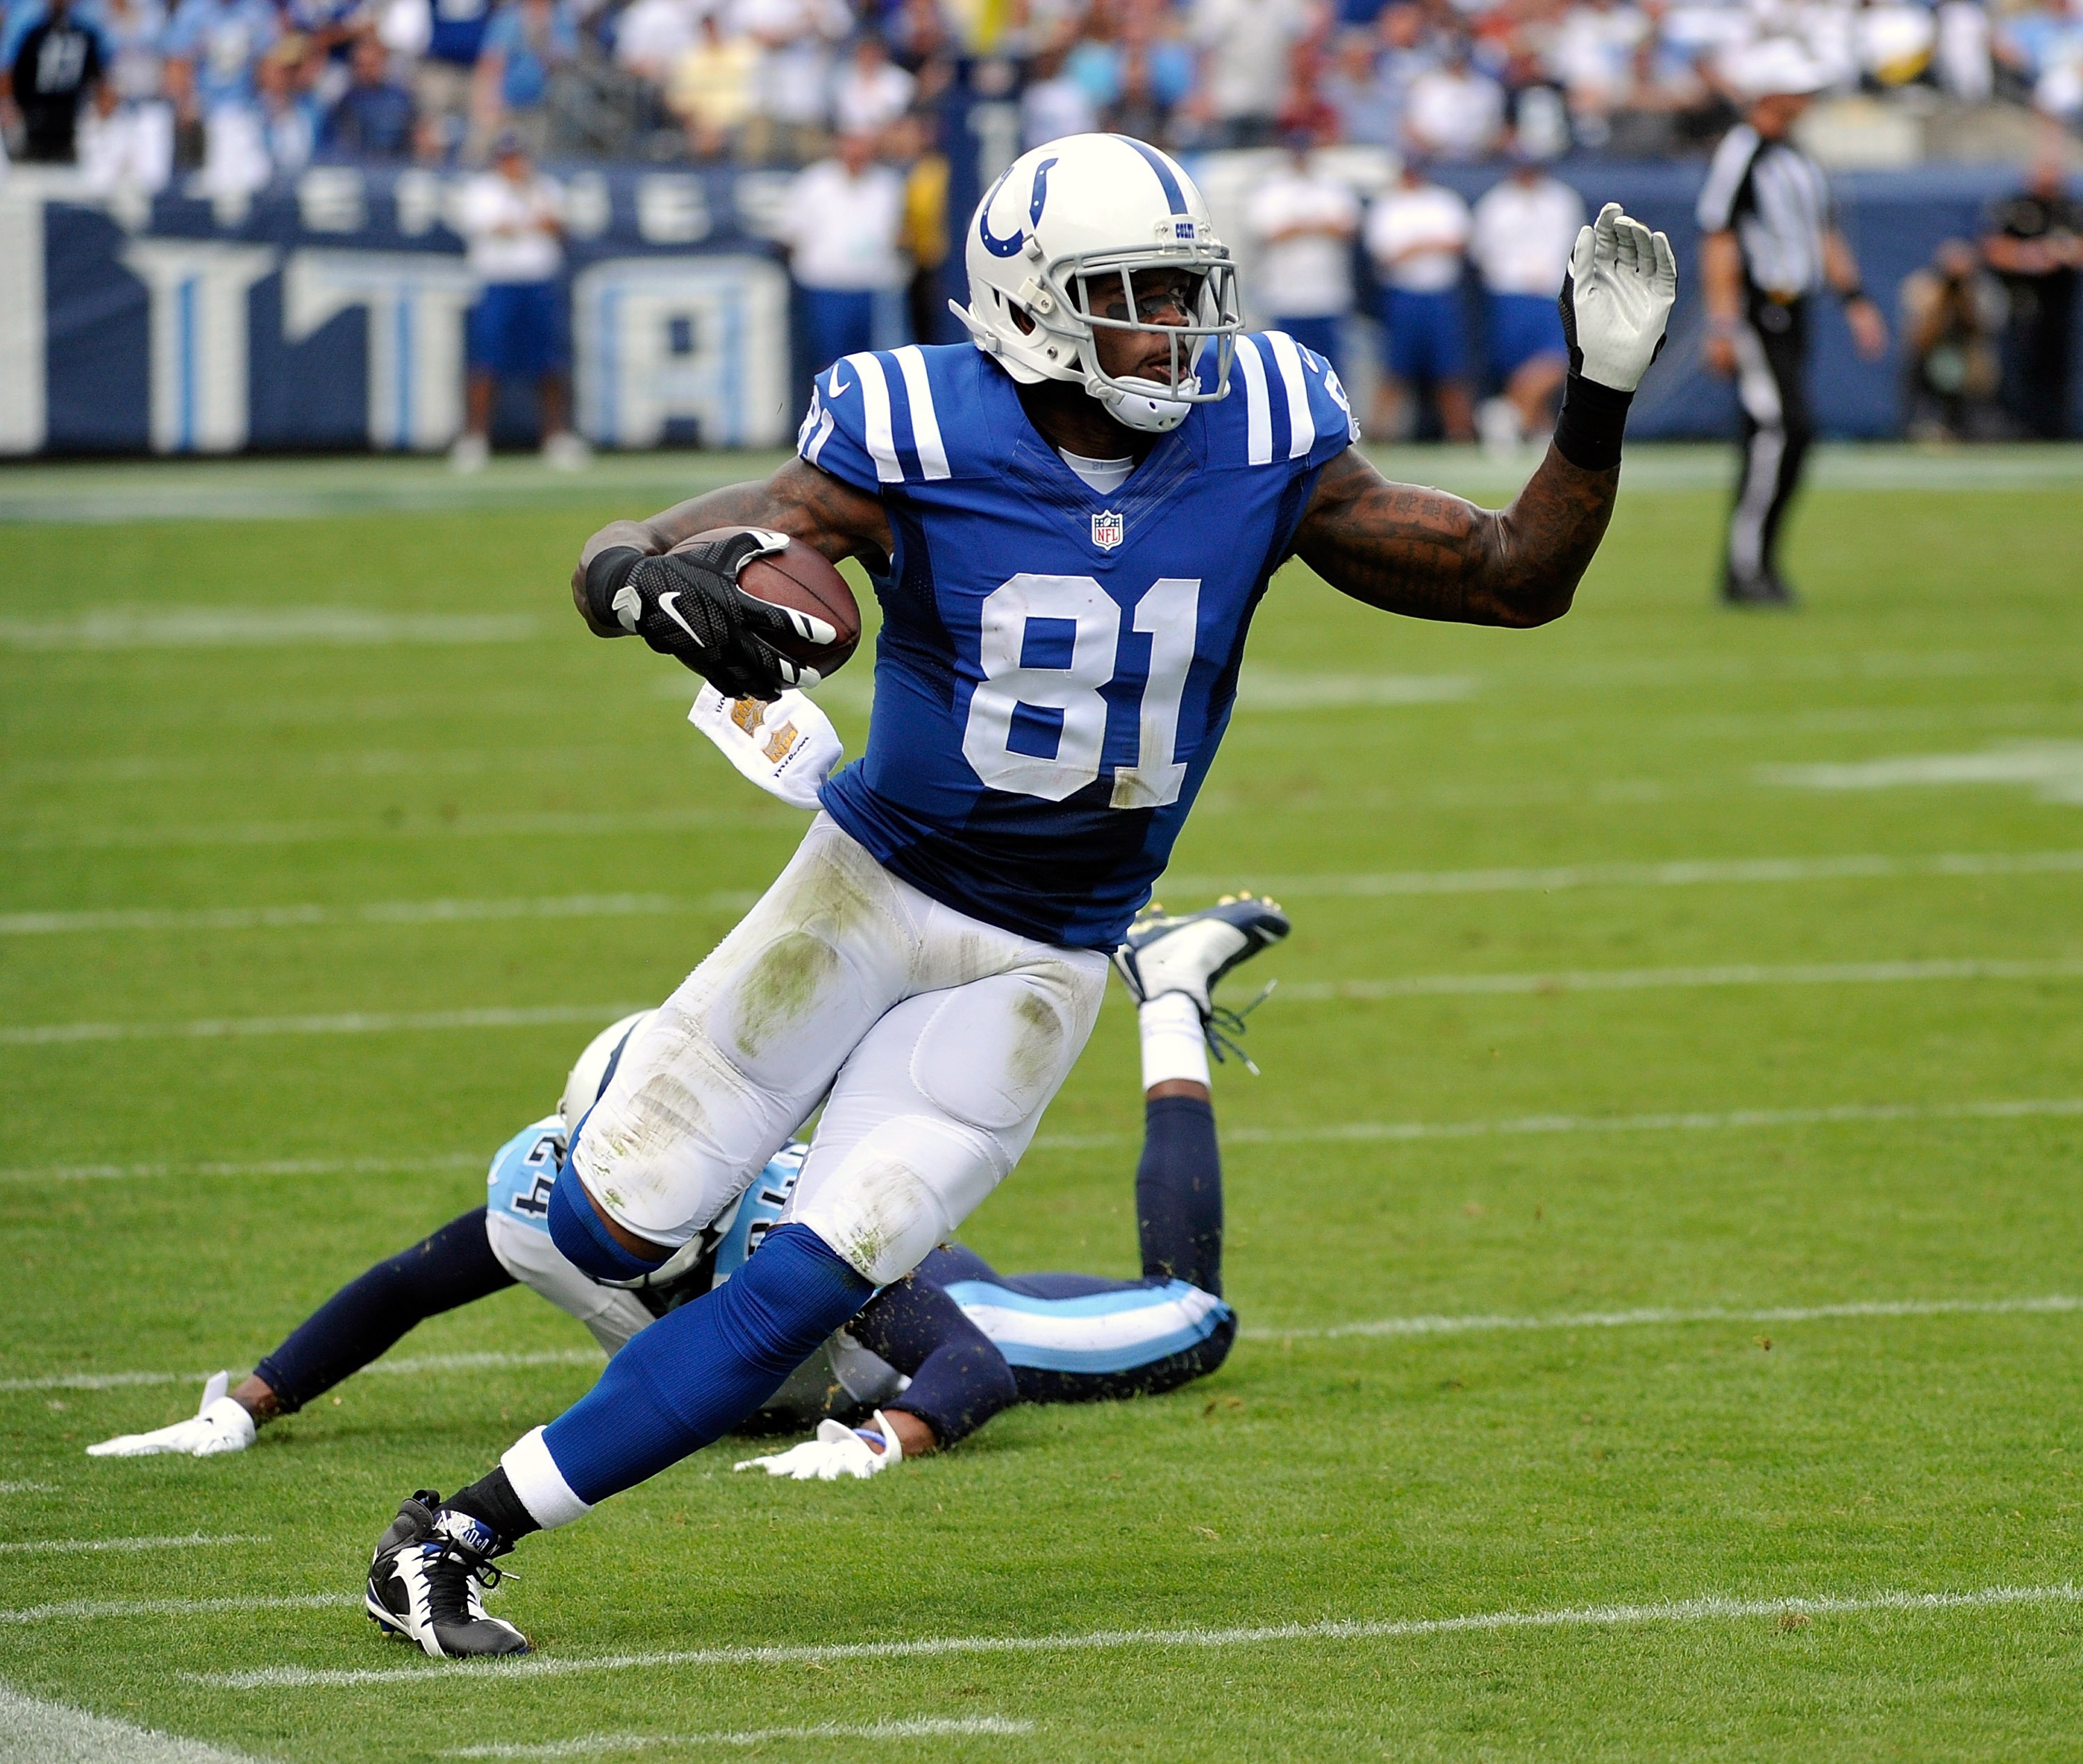 Andre Johnson could have a breakout game tonight against his former team. (Getty)